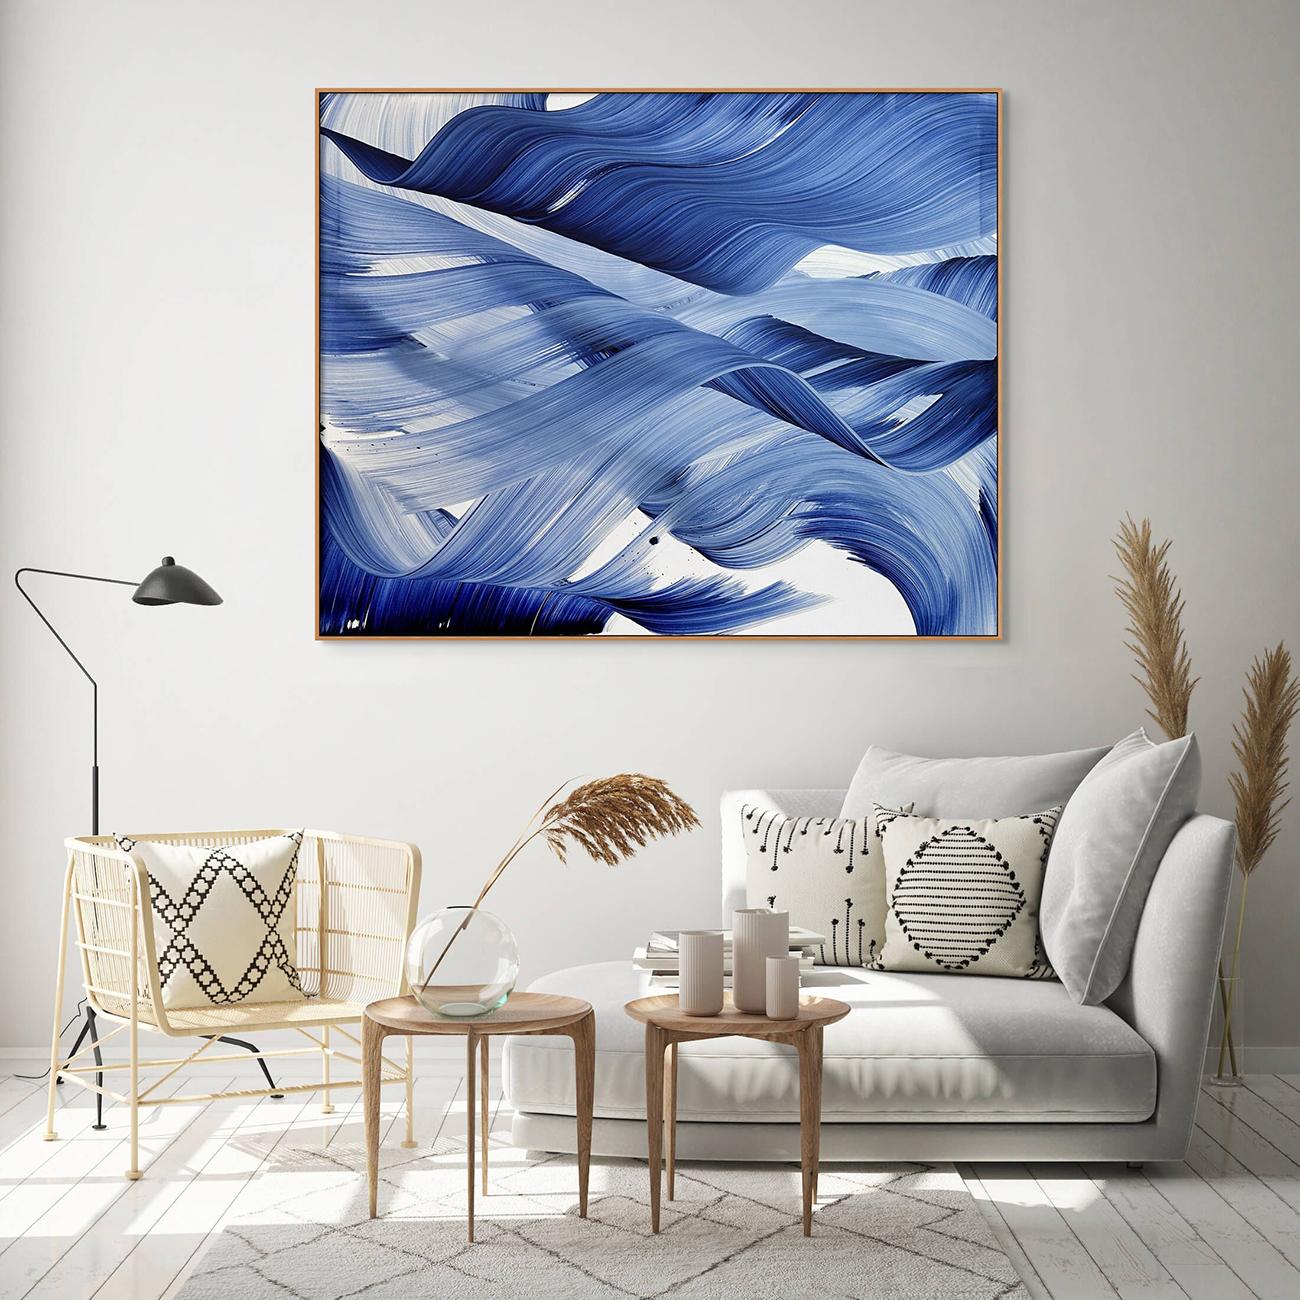 Sky Figurations (Abstract painting)
Acrylic on raw canvas — Unframed

This artwork will be shipped rolled in a dent-resistant tube.
This method is especially safe for large works, and provides lower shipping costs as well.
Rolled works can be easily